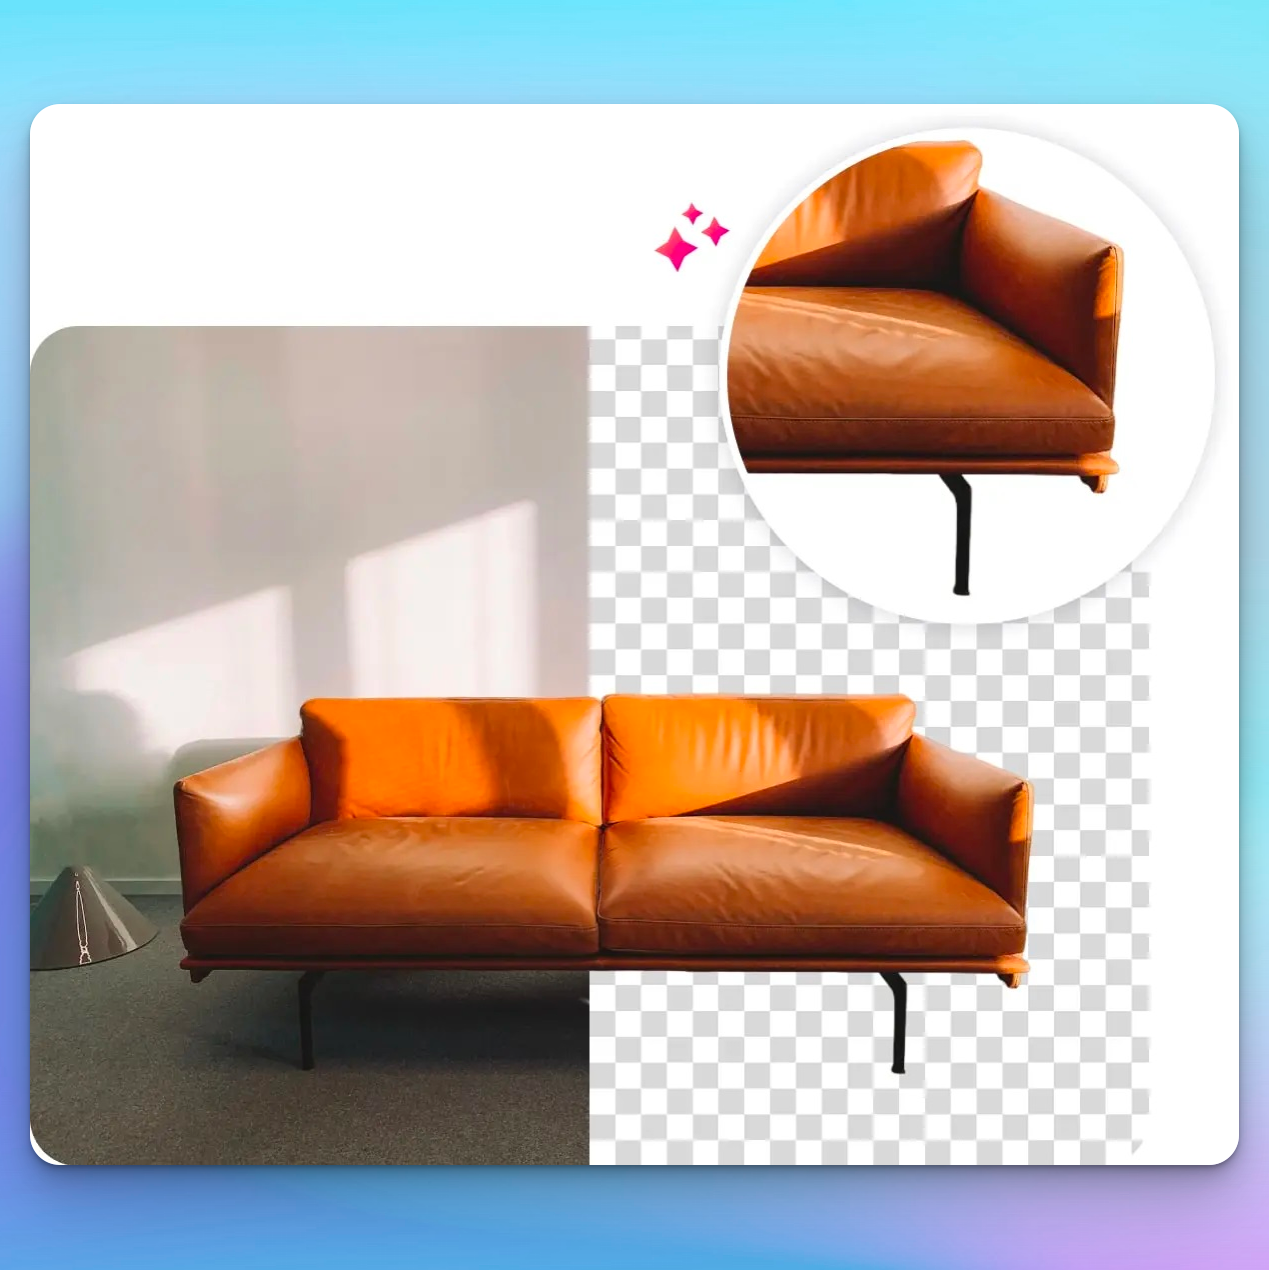 Remove Backgrounds from images for Ecommerce